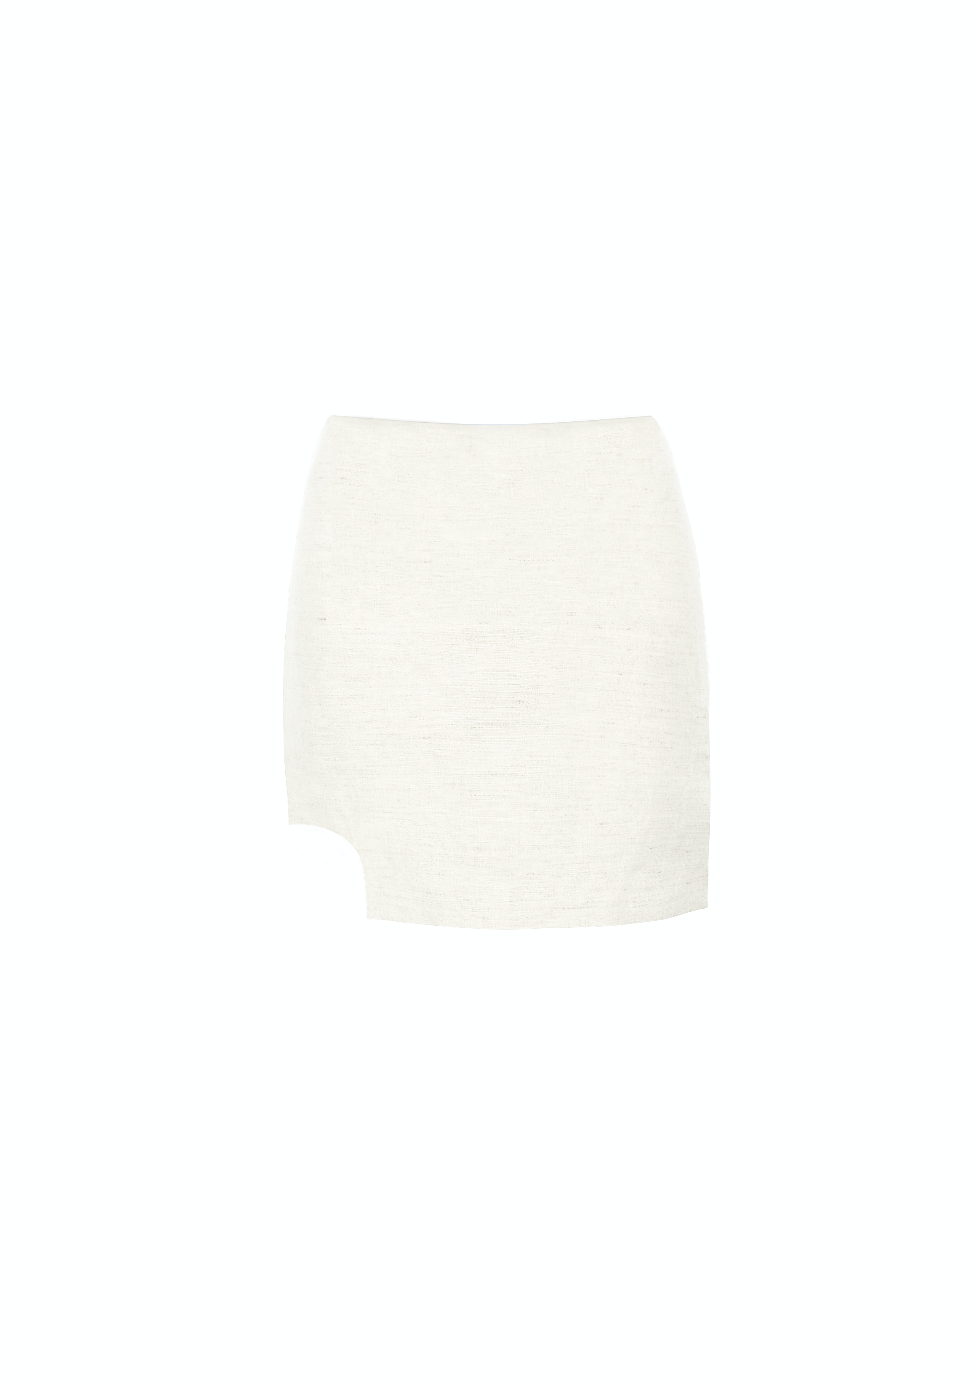 Dipped waist mini skirt in white with side round slit.